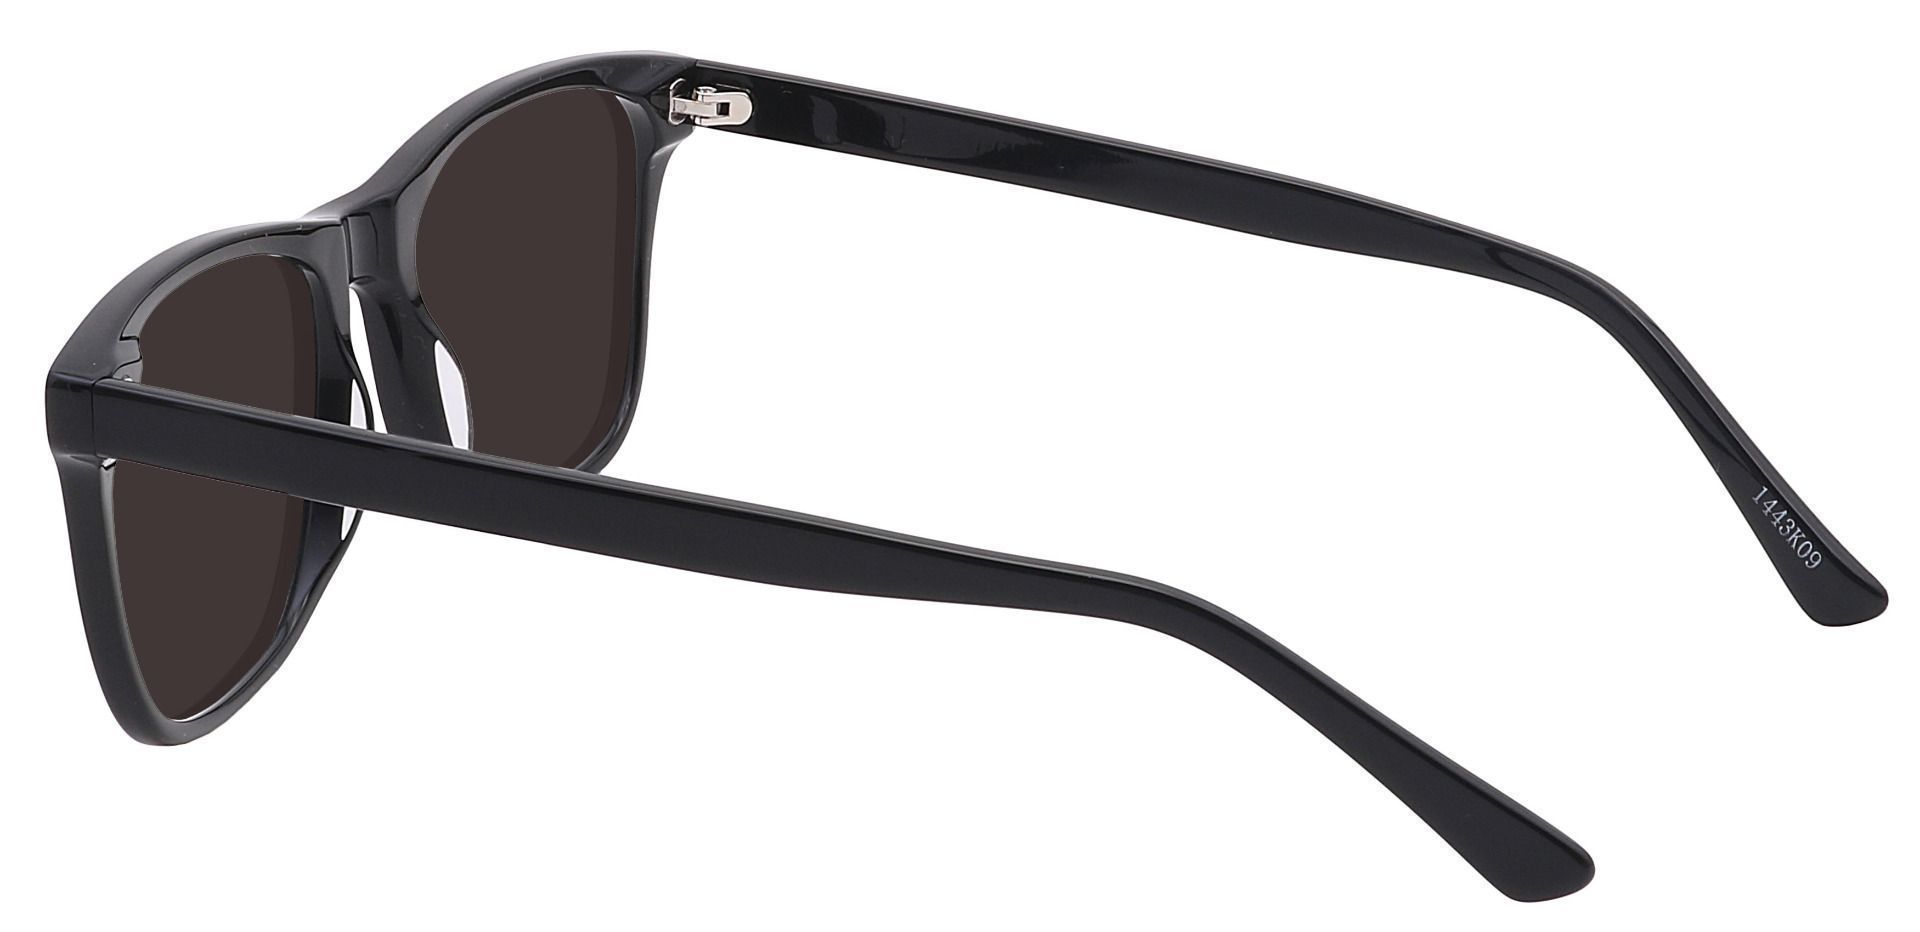 Cantina Square Lined Bifocal Sunglasses - Black Frame With Gray Lenses